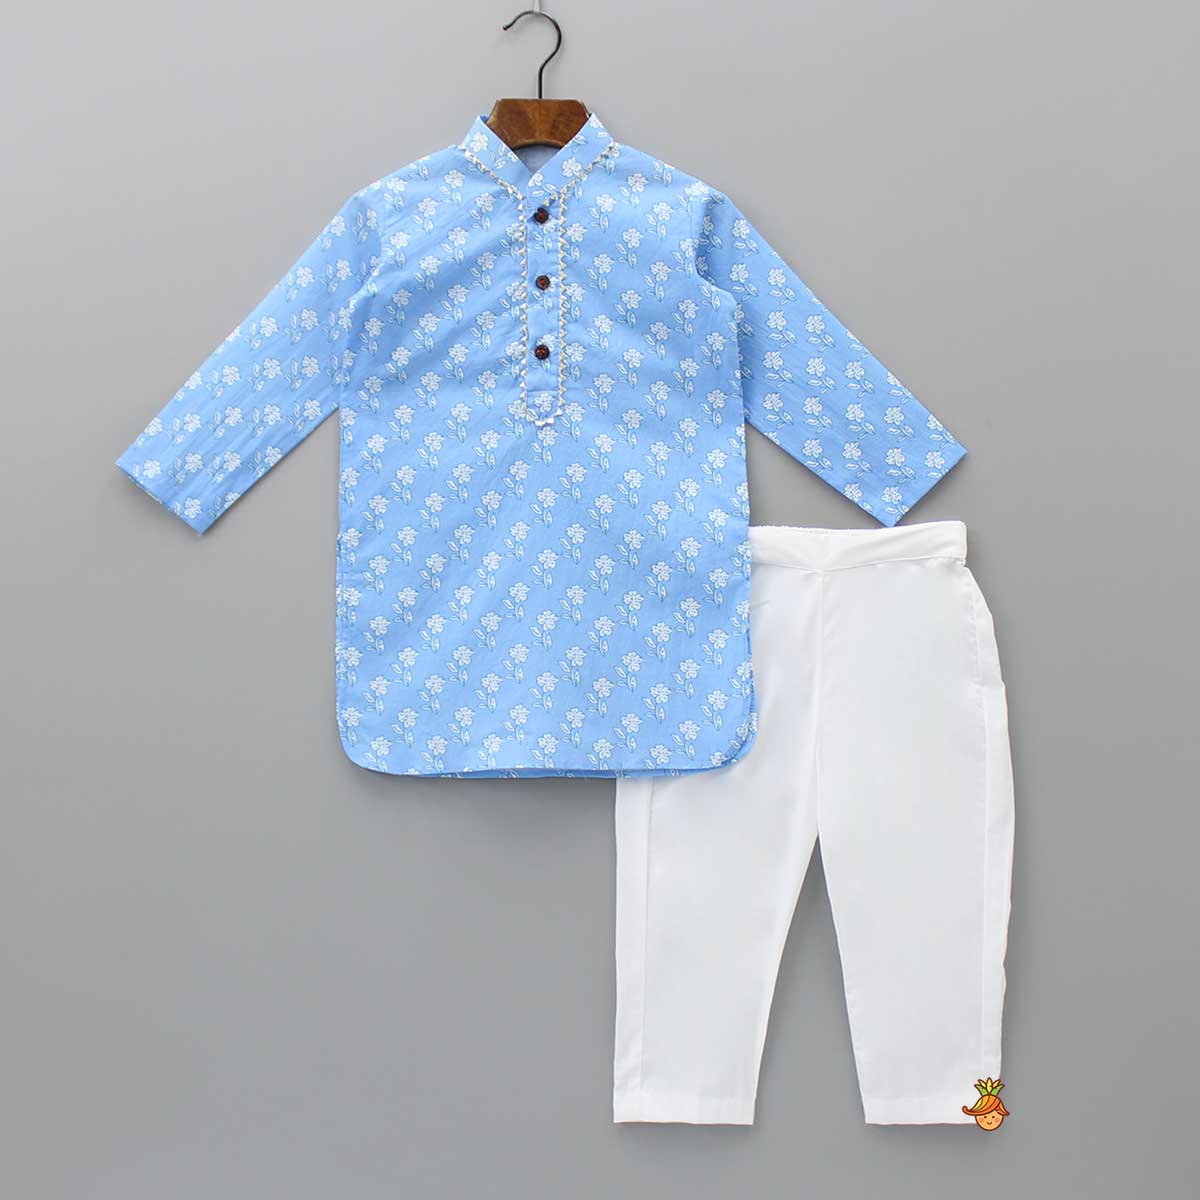 Pre Order: Gota Lace Detailed Powder Blue Ethnic Kurta With Floral Printed Jacket And Pyjama